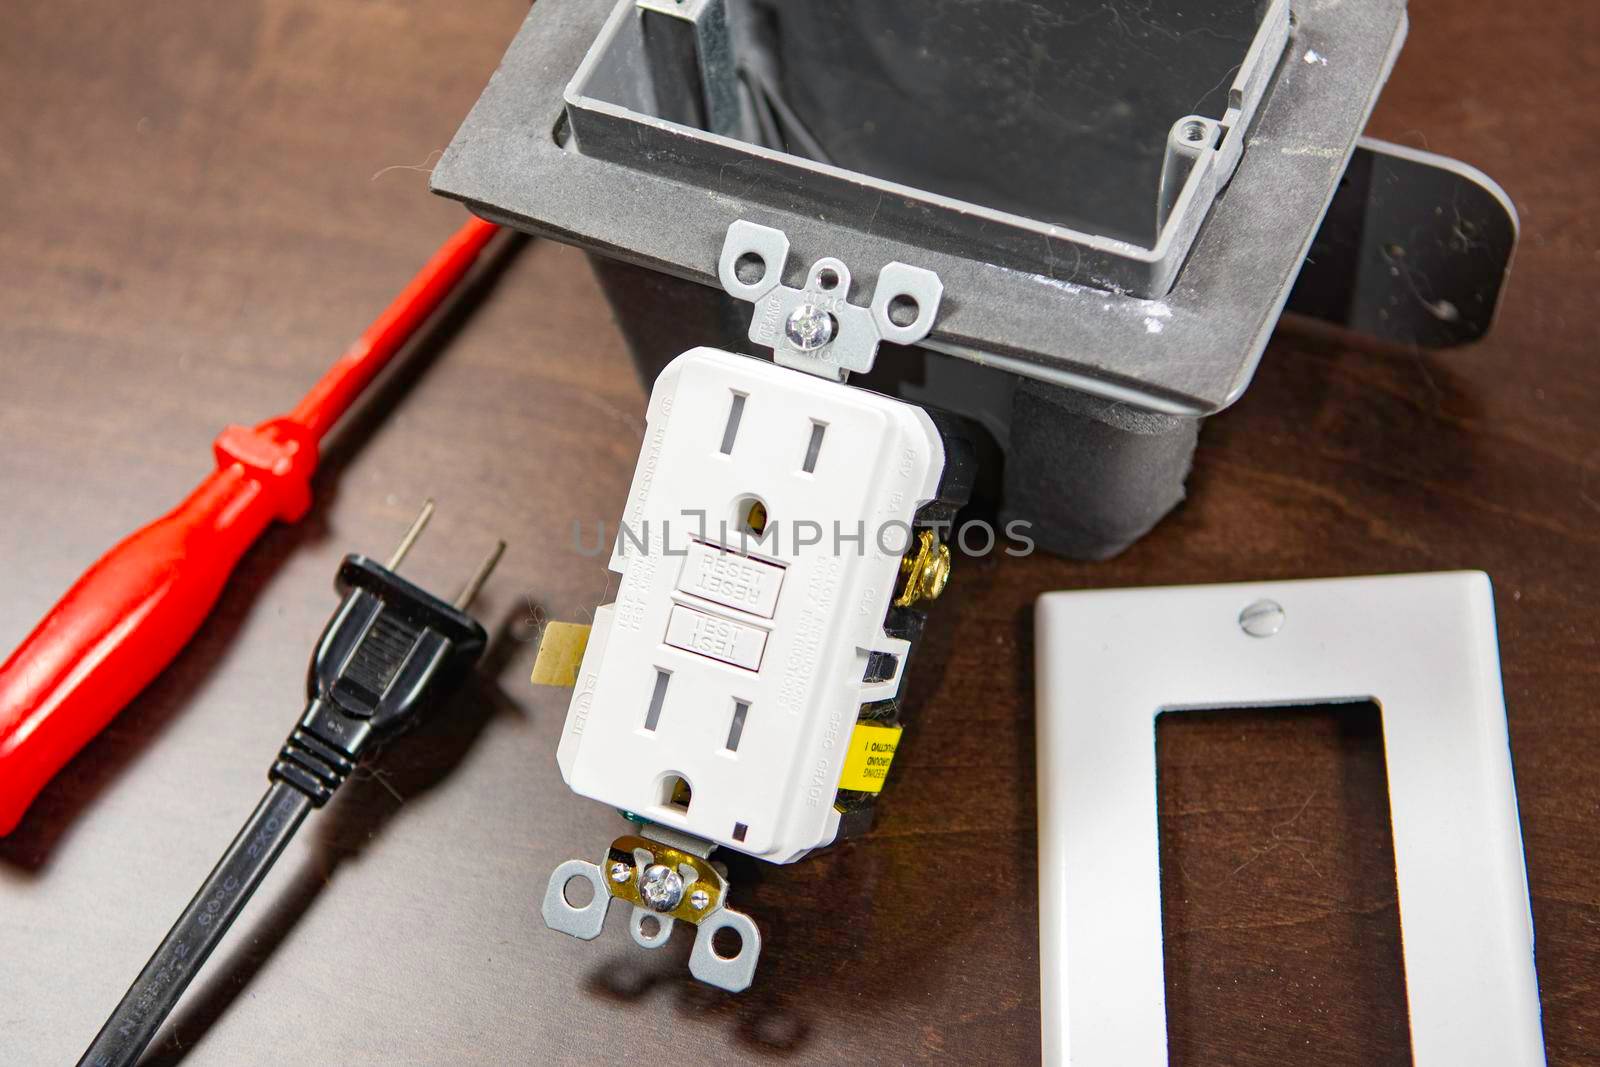 A tested electrical outlet lies on the table before being installed in a junction box on the wall.